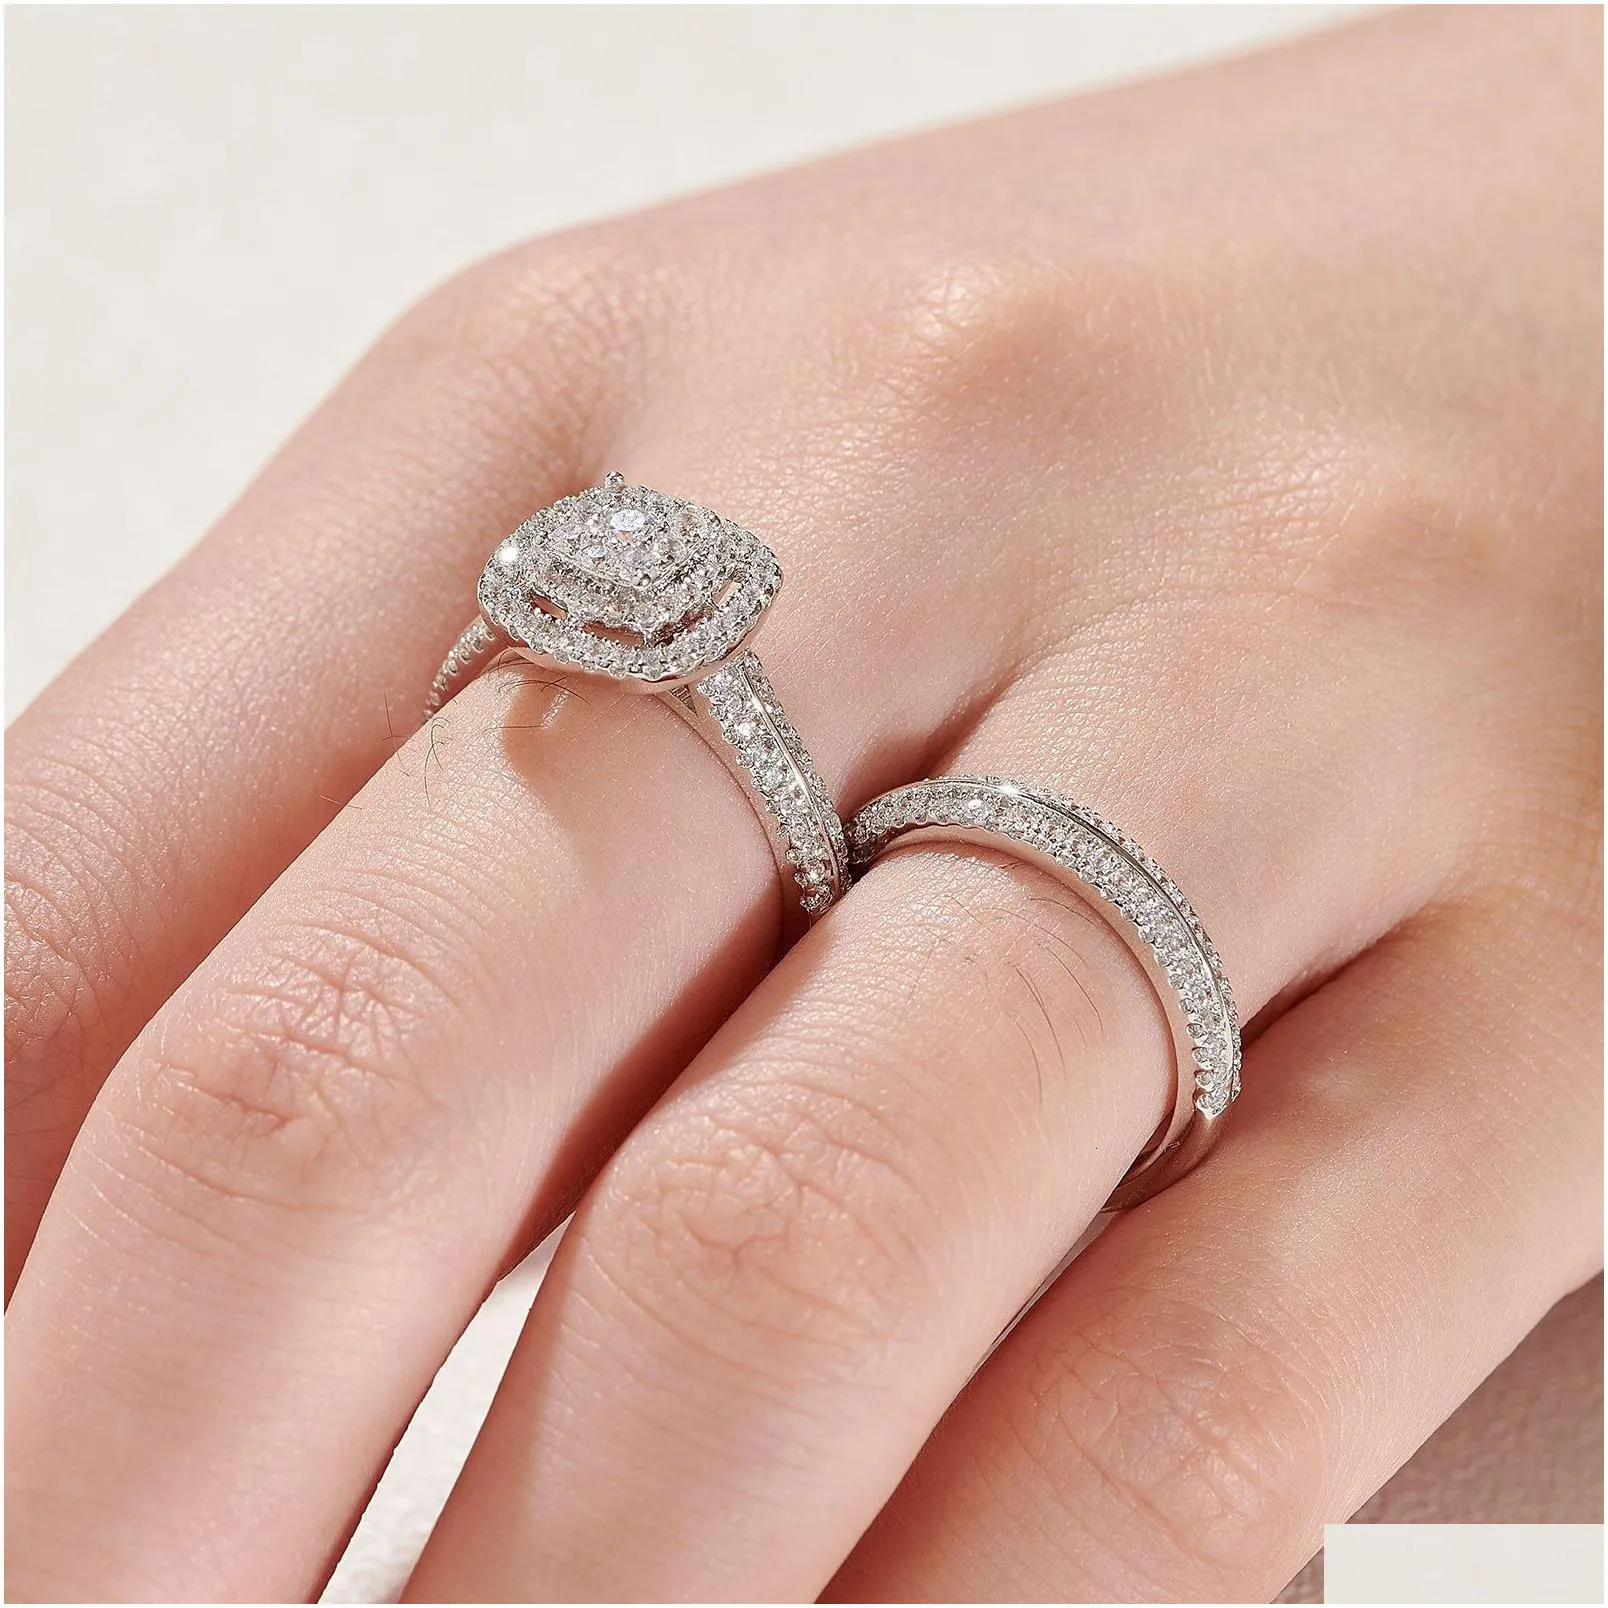 Solitaire Ring she 2Pcs Wedding Rings for Women Solid 925 Sterling Silver Engagement Ring Bridal Set 1.6Ct Halo Round Cut AAAAA Zircon